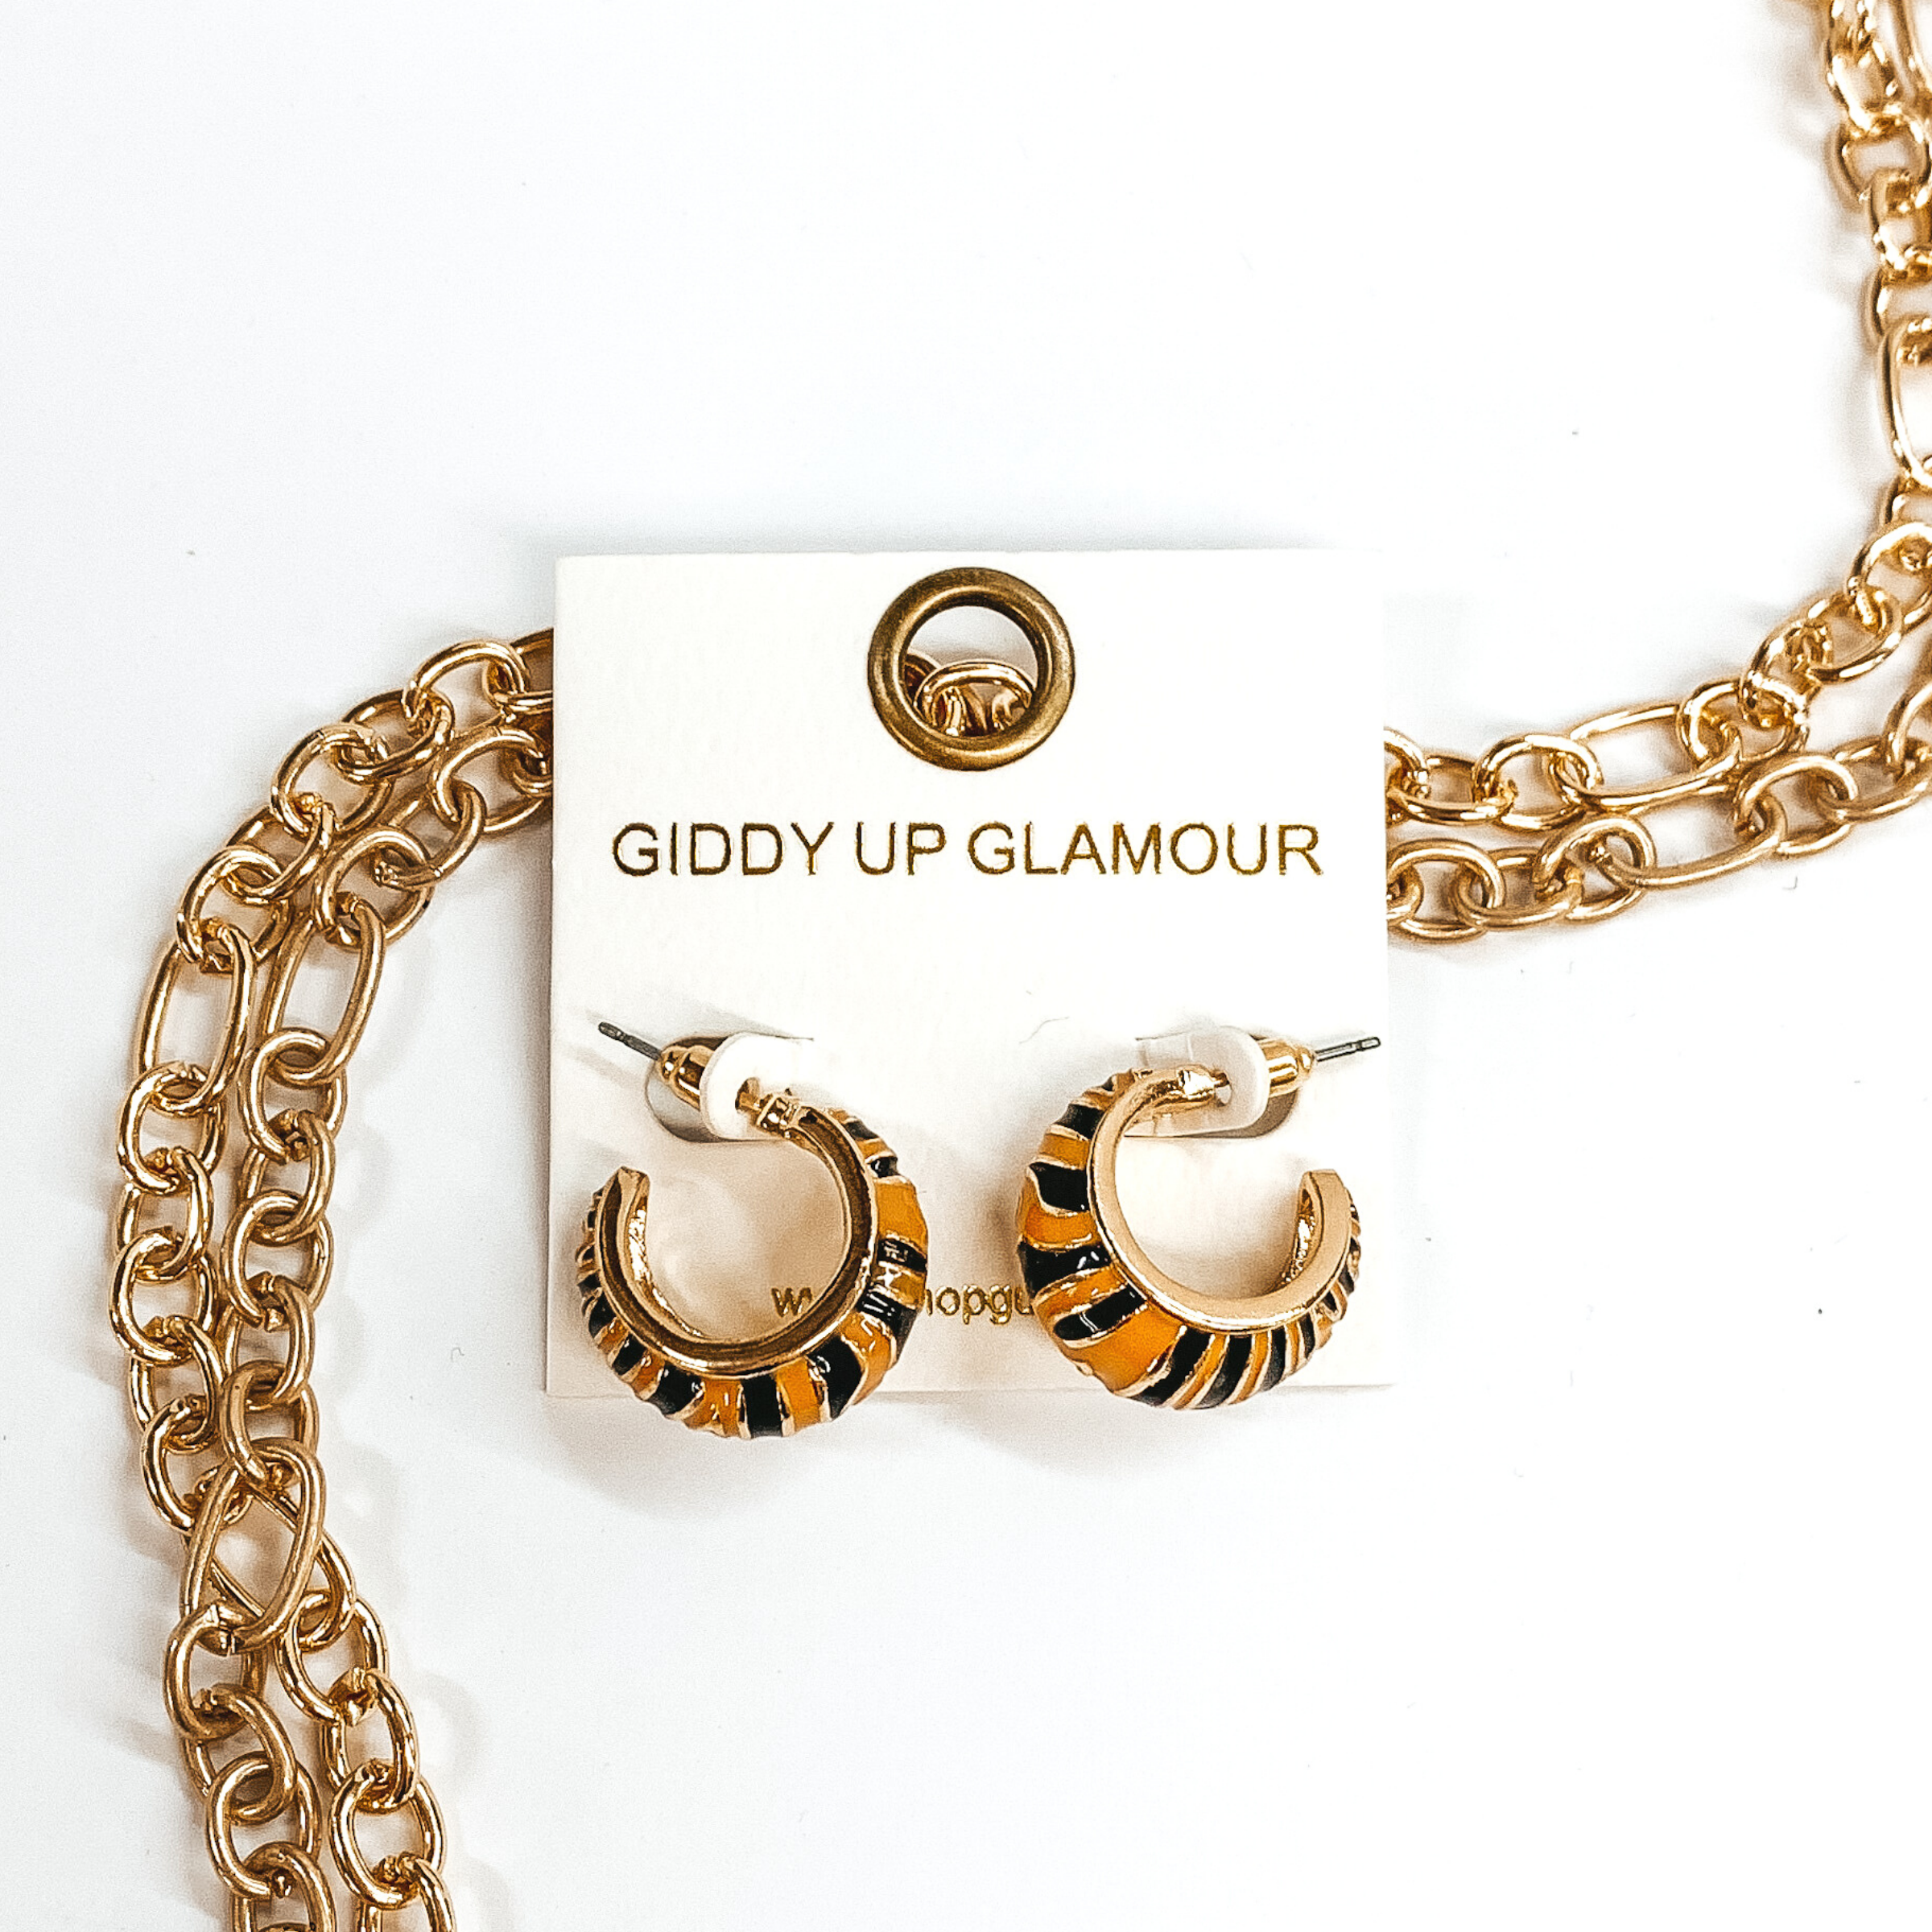 Mini, gold outline, tan hoop huggies with black tiger print.These earrings are pictured on a white earrings holder, laying on top of gold chains on a white background.